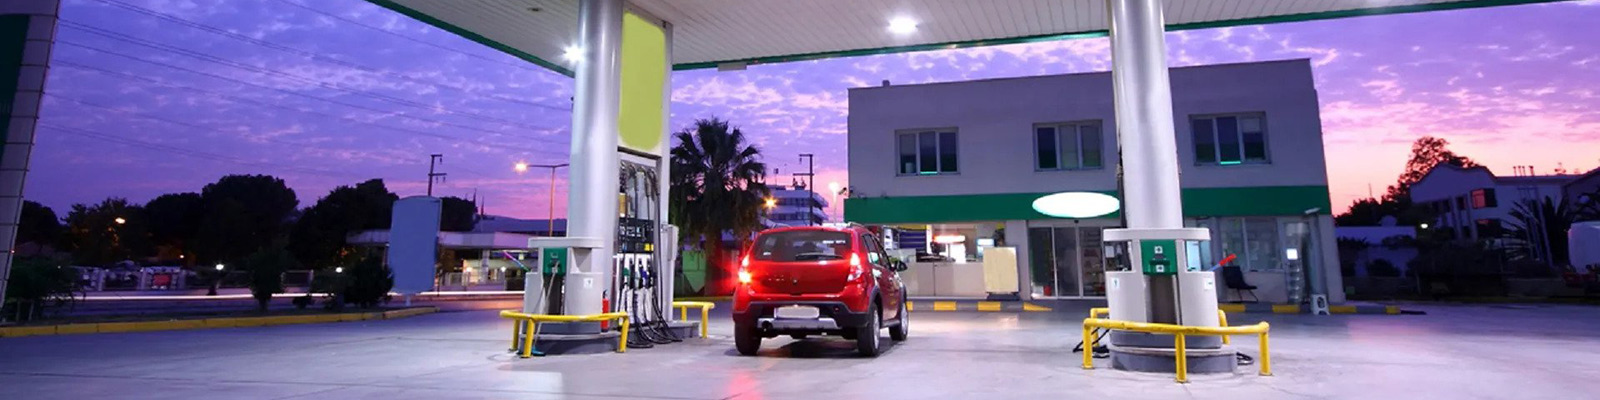 red car in petrol station